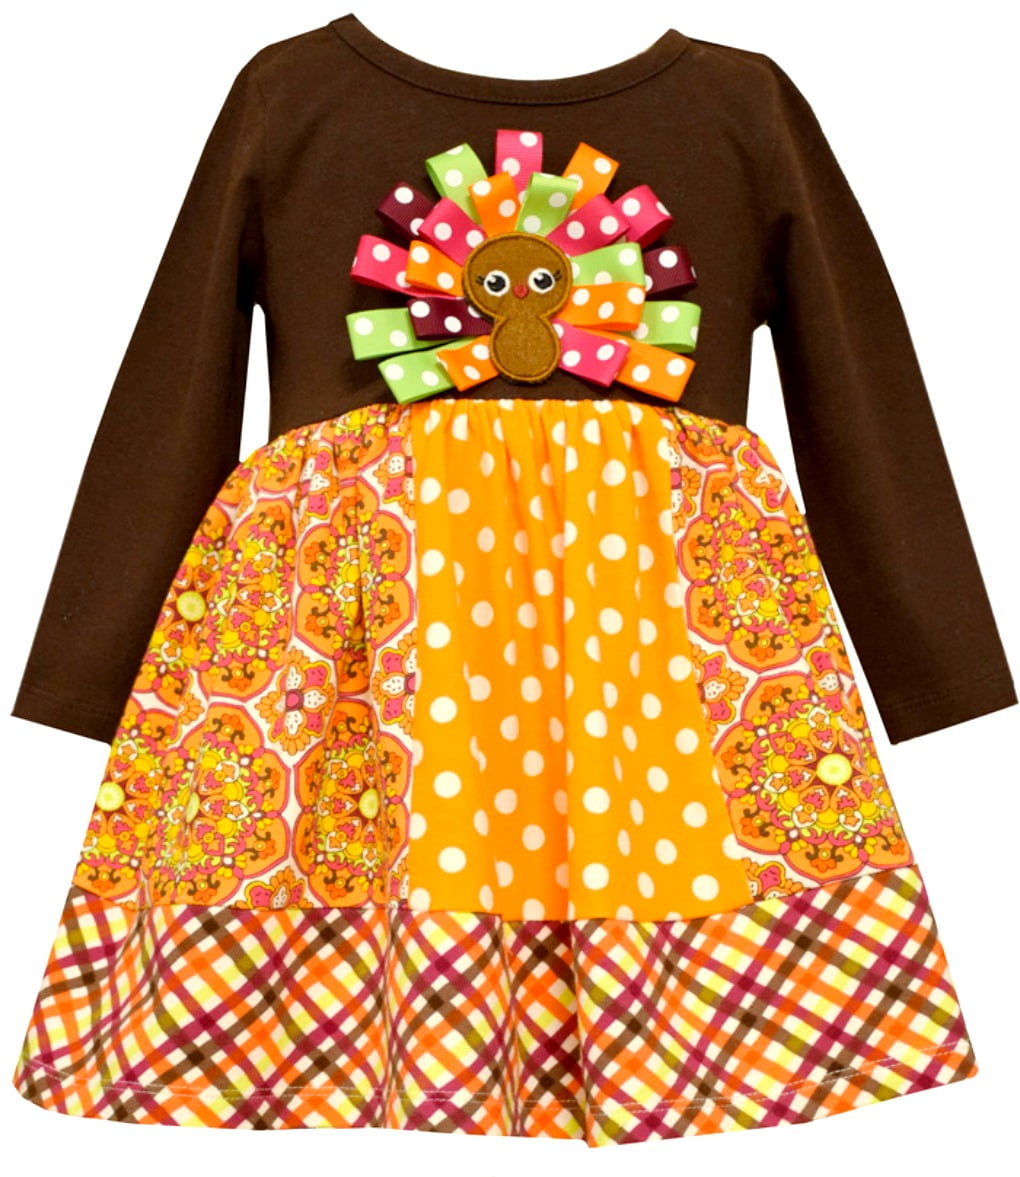 thanksgiving outfit girl 4t